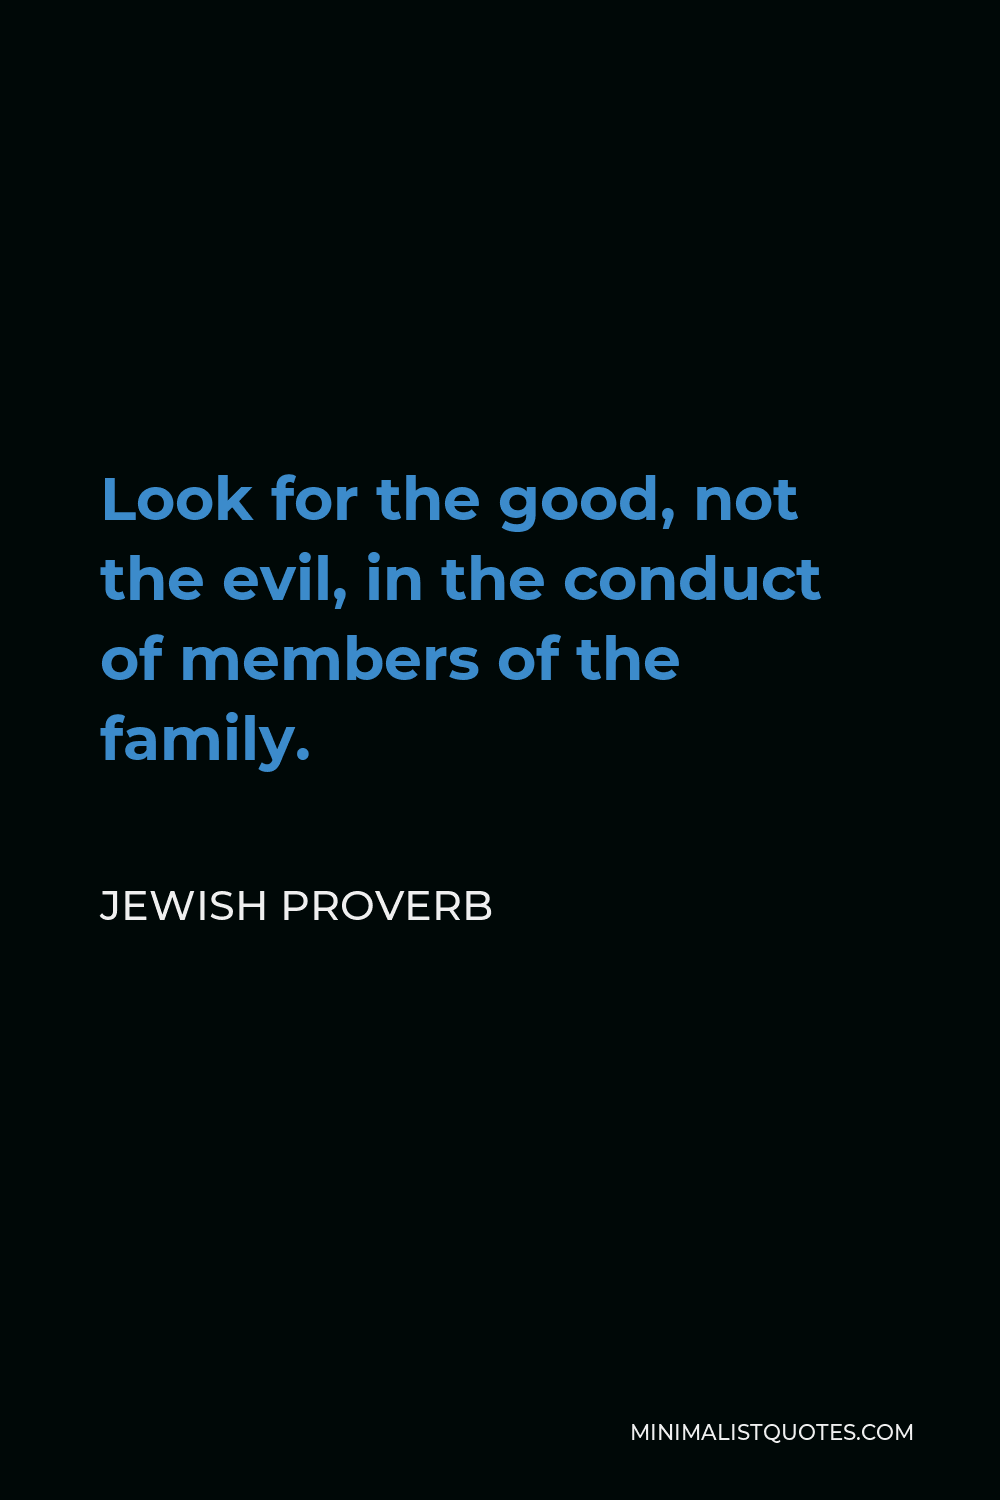 Jewish Proverb Quote - Look for the good, not the evil, in the conduct of members of the family.